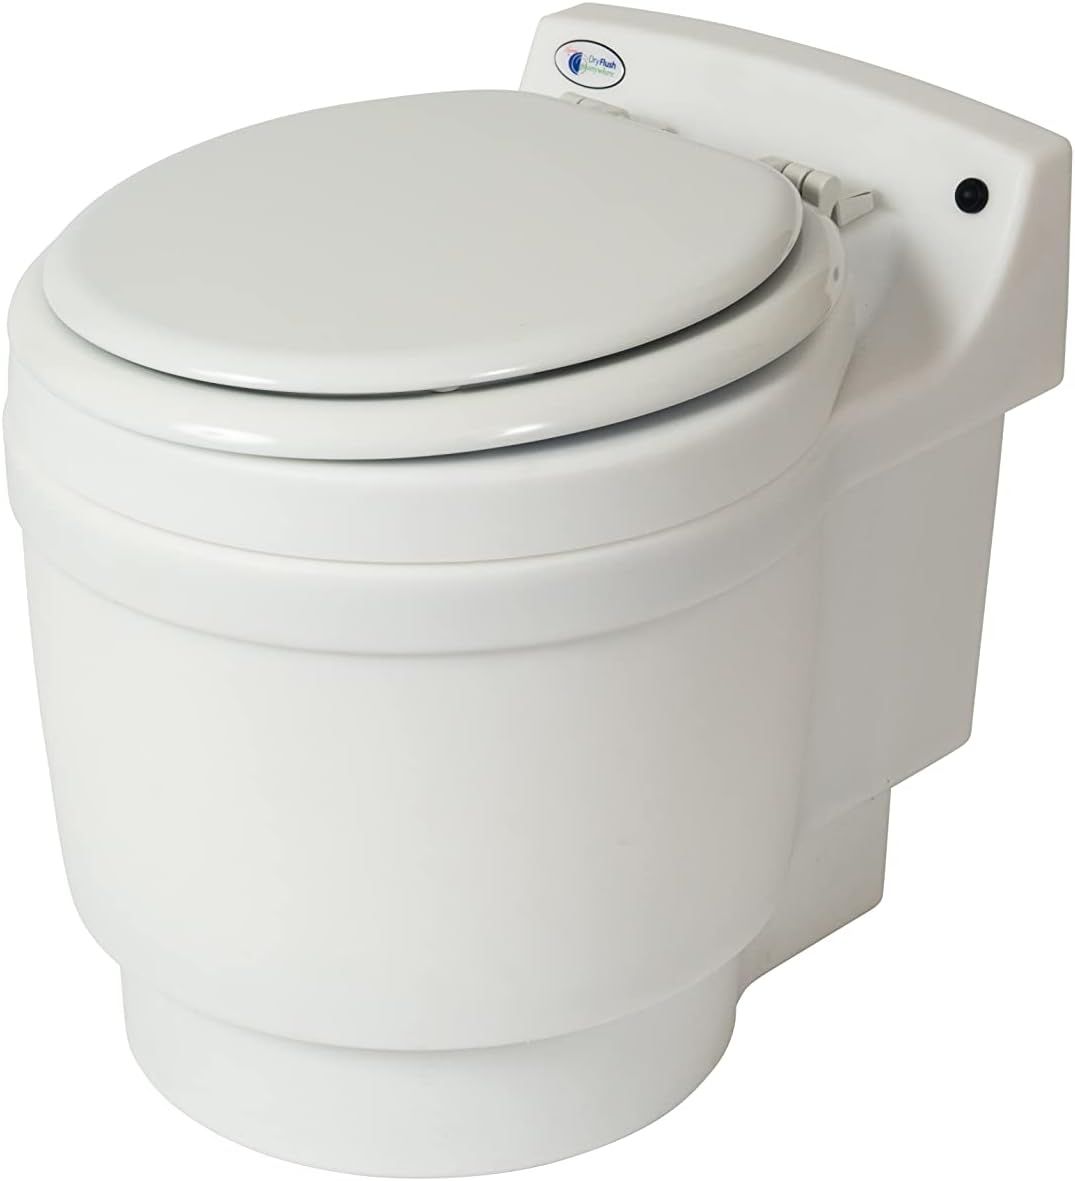 Dry Flush DF1045 Laveo Waterless Portable Toilet with 12V Battery and Charger New